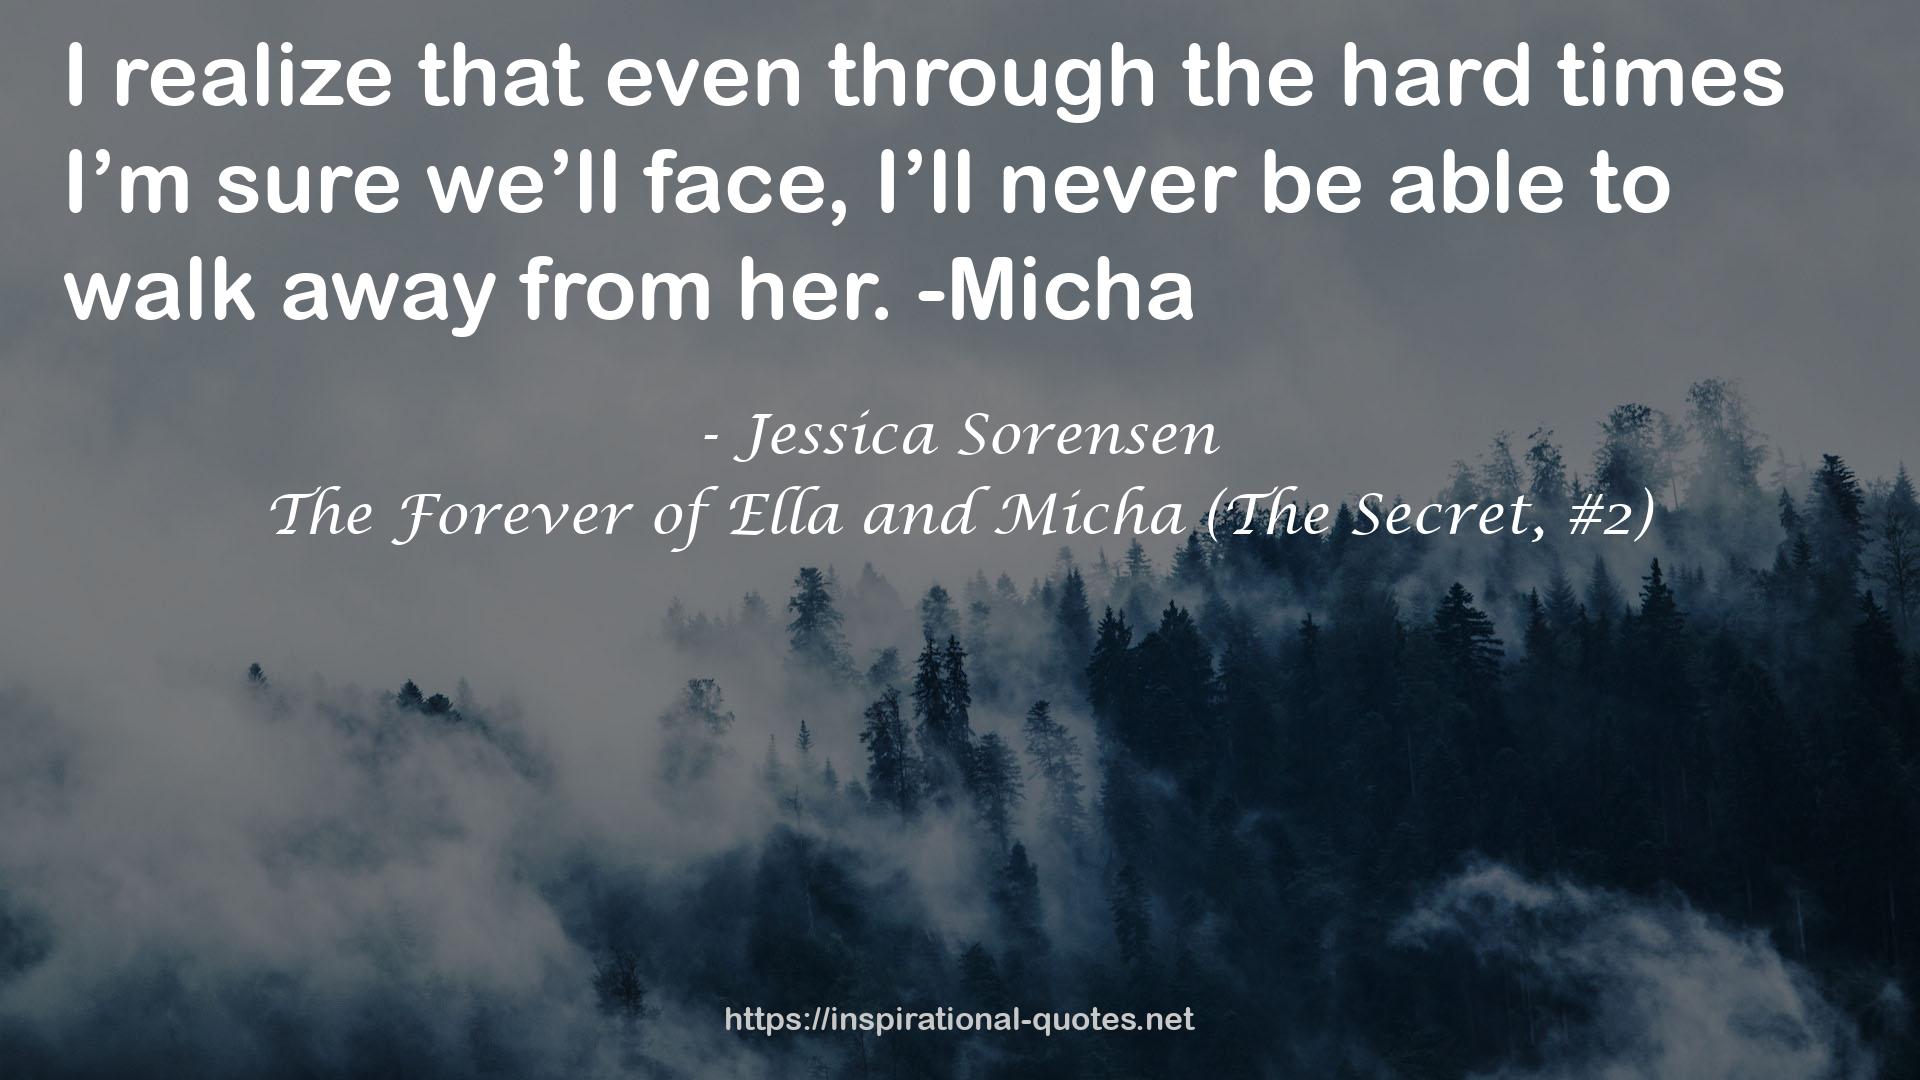 The Forever of Ella and Micha (The Secret, #2) QUOTES